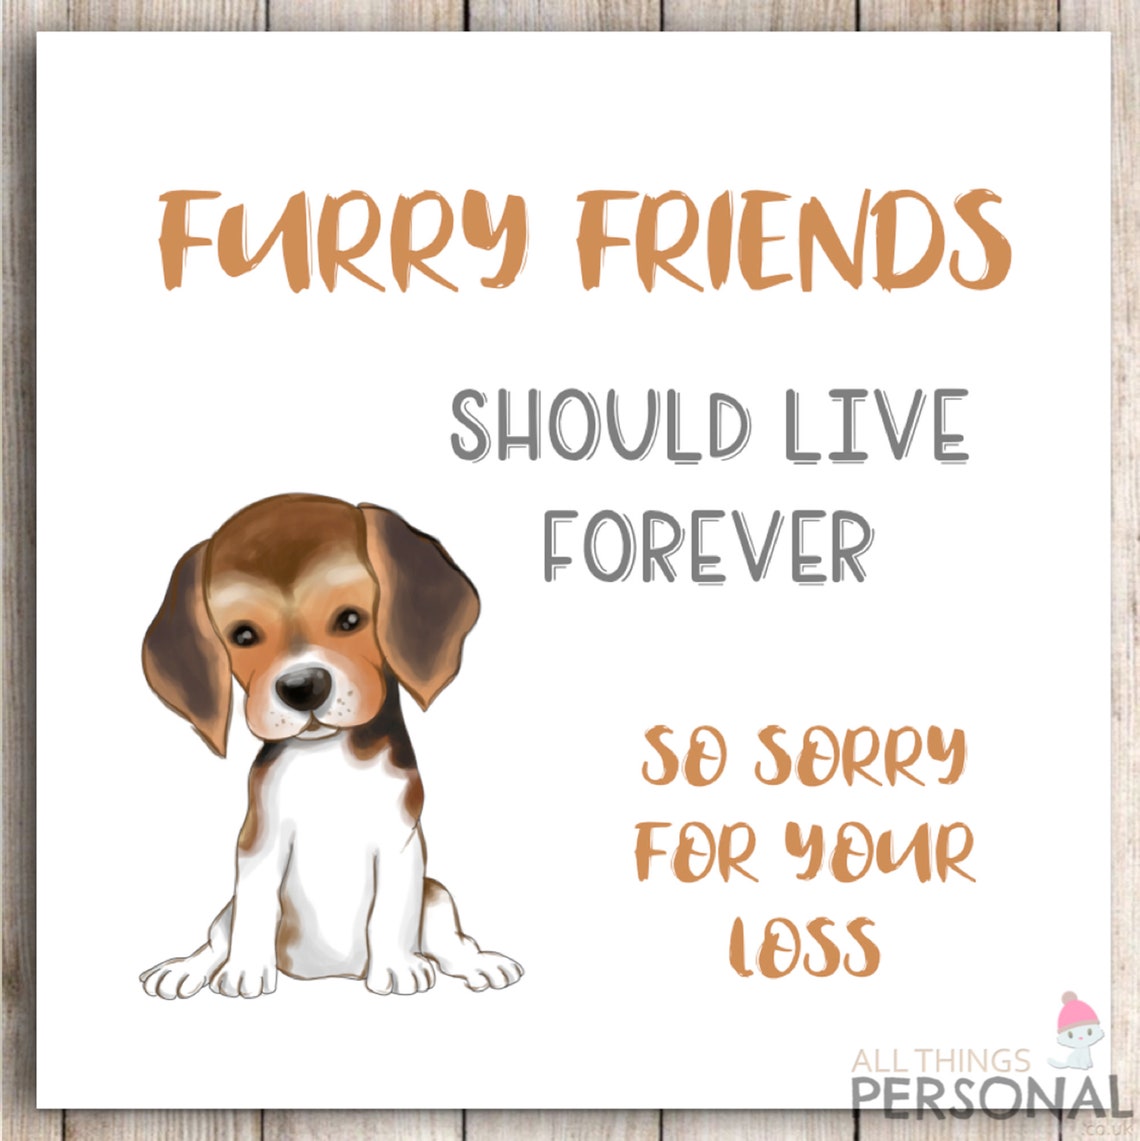 sorry-for-your-loss-dog-sympathy-card-condolence-furry-friend-etsy